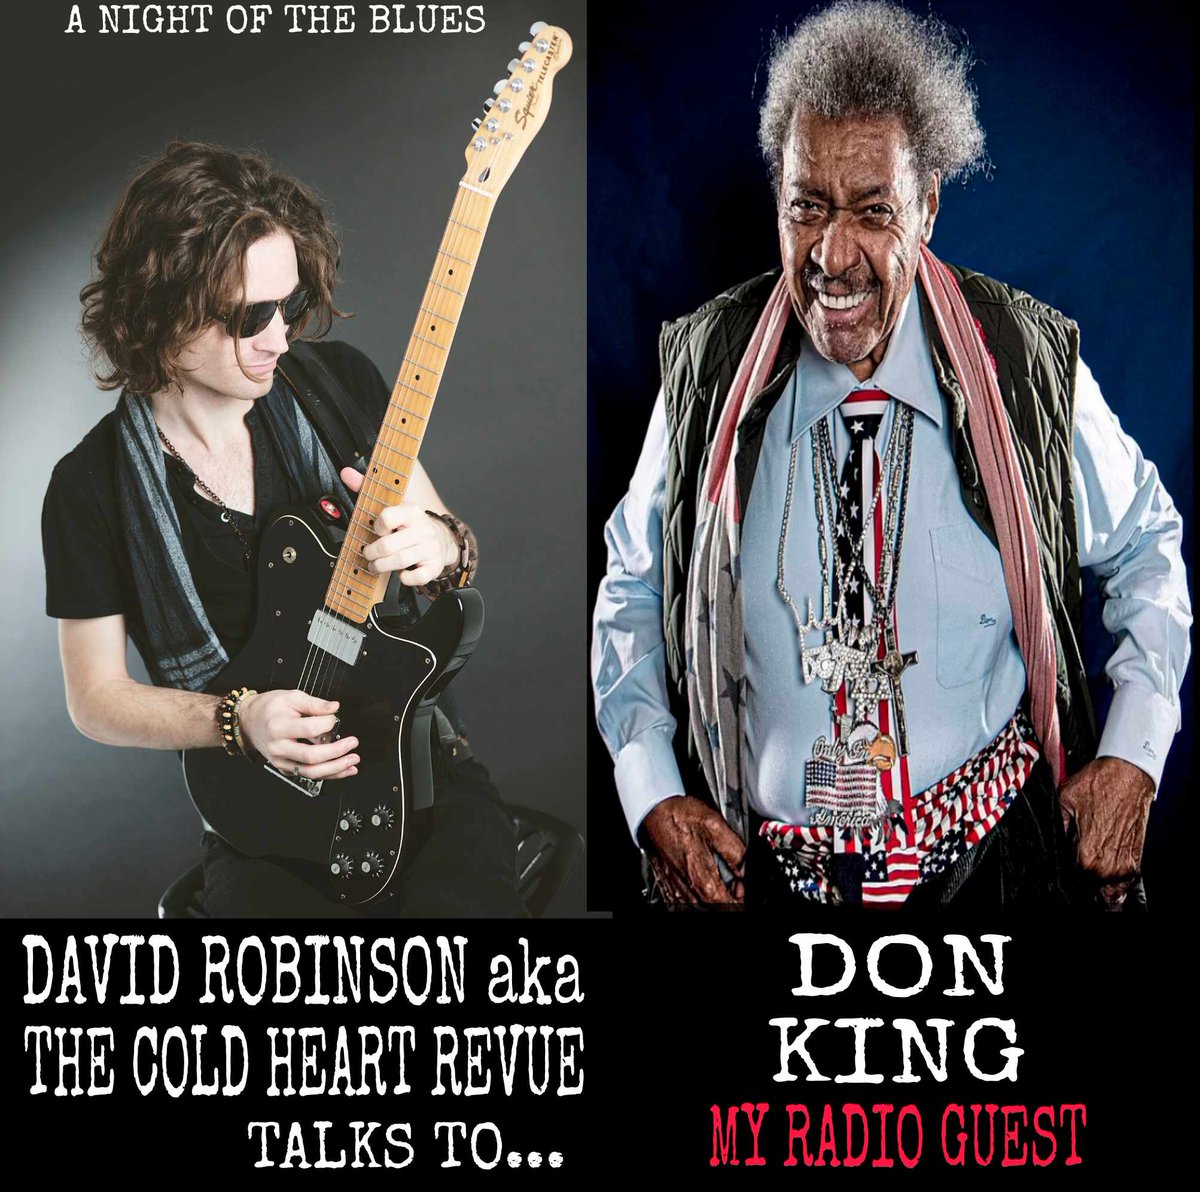 RADIO: my interview guest is Don King. The most recognisable promoter in #Boxing -responsible for 'The Rumble In The Jungle' with #muhammadali and George Foreman. He hosted the Zaire 74 music festival- featuring James Brown David Robinson aka @coldheartrevue #sport #donking